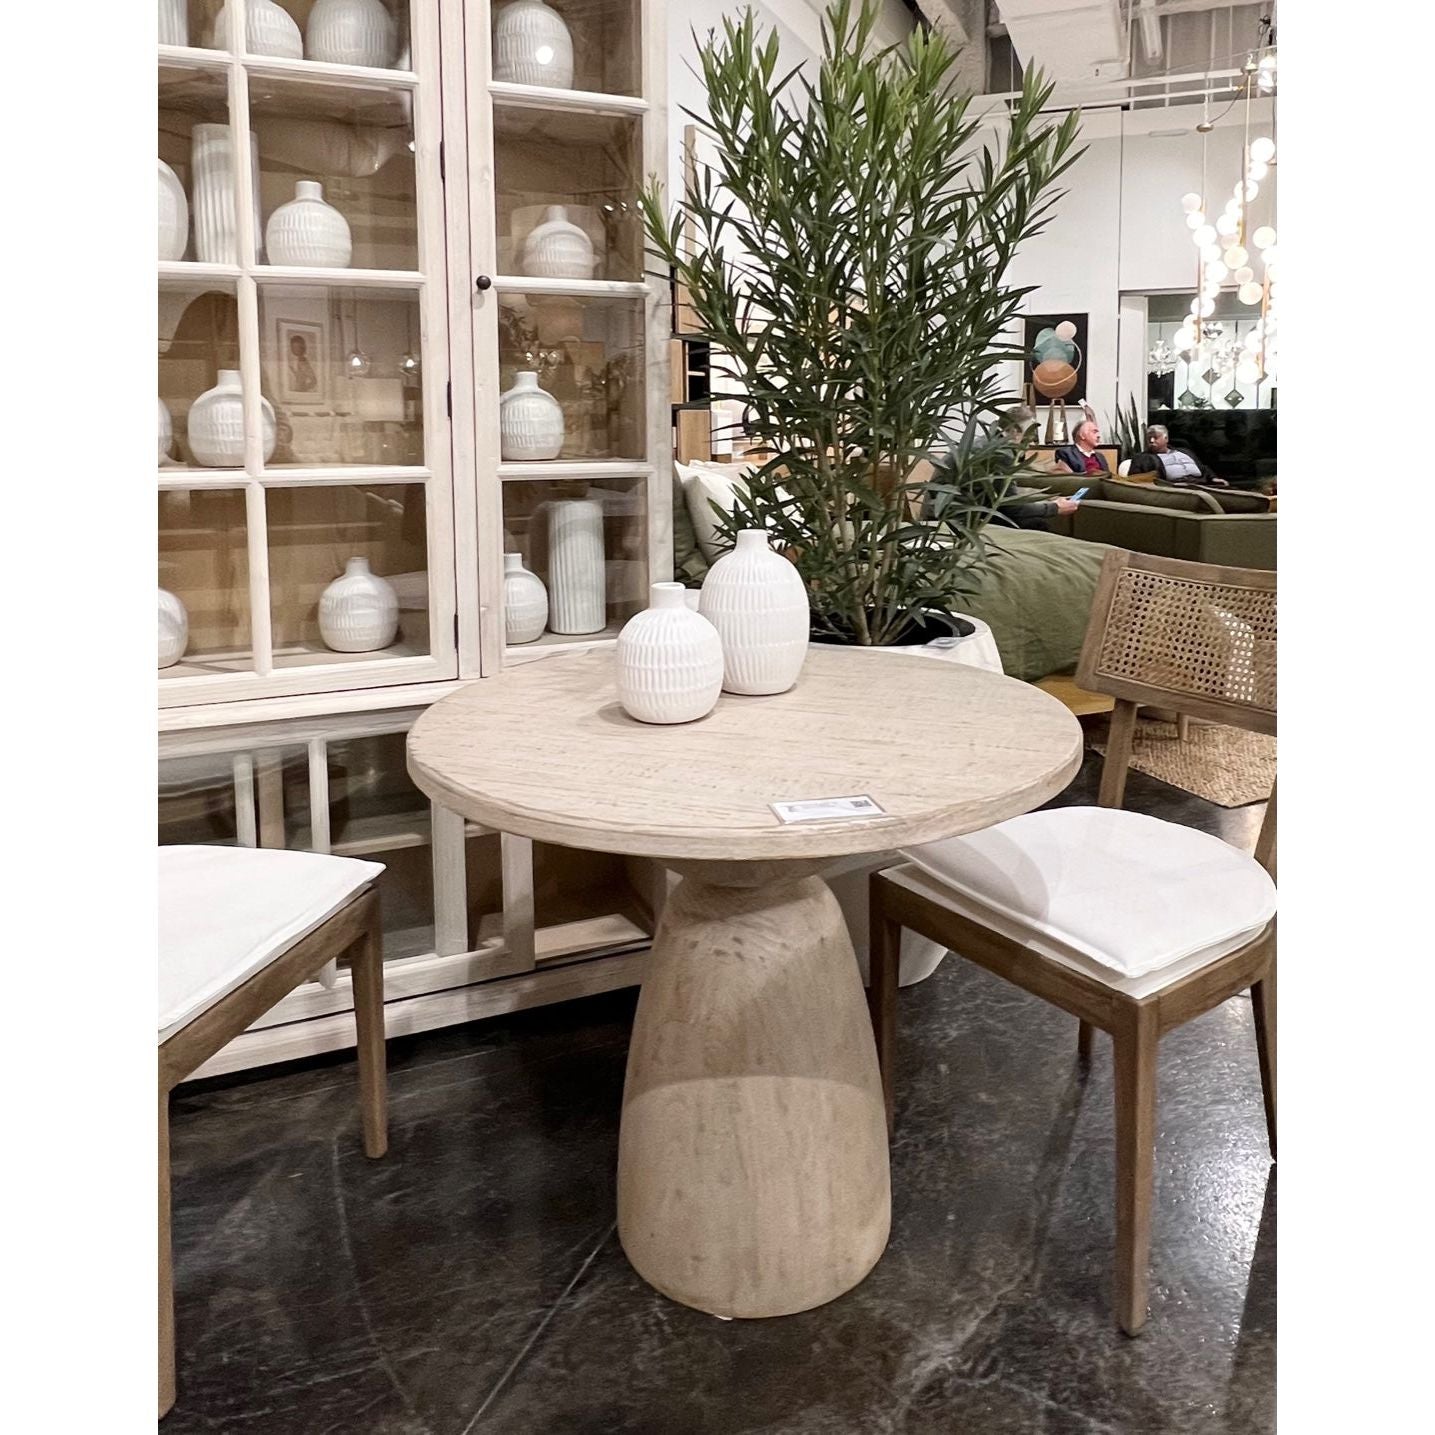 We love the curves and structure of this Cabrera Bistro Table. It is meticulously finished by hand, therefore there may be slight variations in color. Making each piece one-of-a-kind. Amethyst Home provides interior design services, furniture, rugs, and lighting in the Malibu metro area.